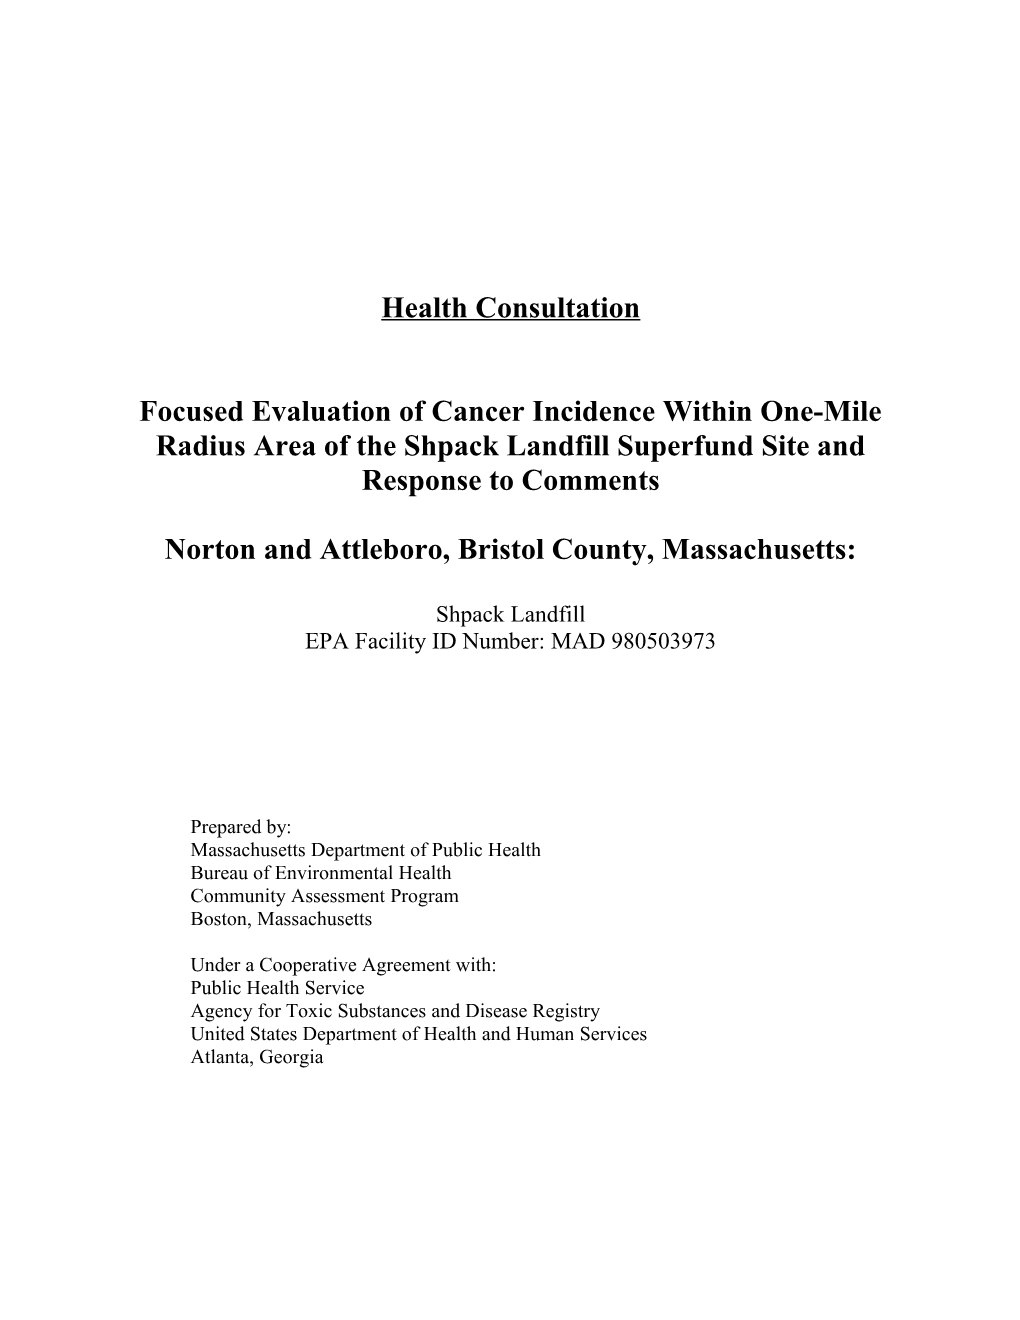 Health Consultation - Focused Evaluation of Cancer Incidence Within One-Mile Radius Area